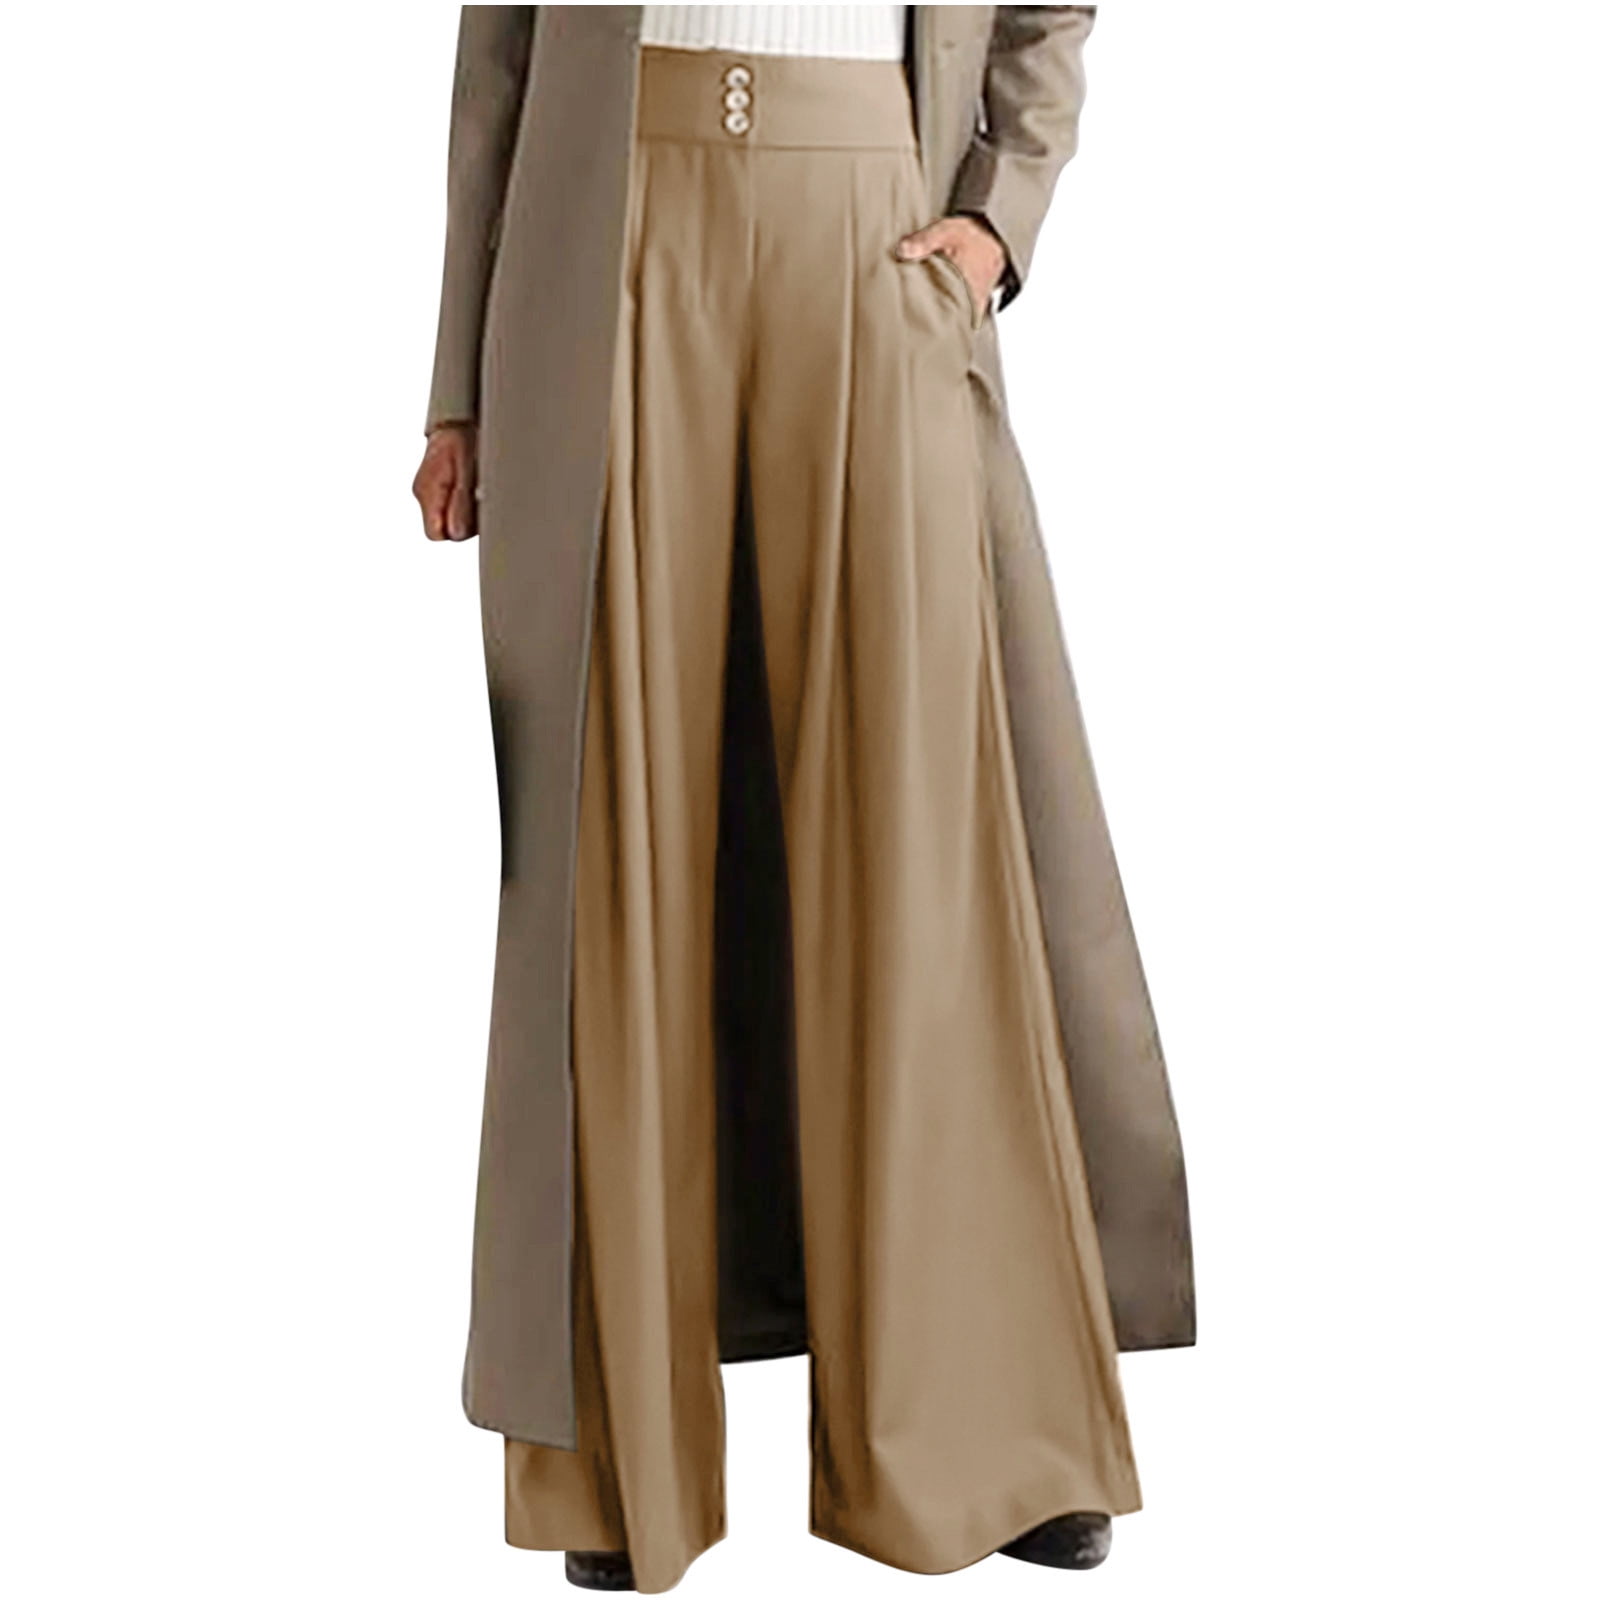 YUNAFFT Yoga Pants for Women Clearance Plus Size Women's Fashion Casual  Full-Length Loose Pants Solid High Waist Trousers Long Straight Wide Leg  Pants 